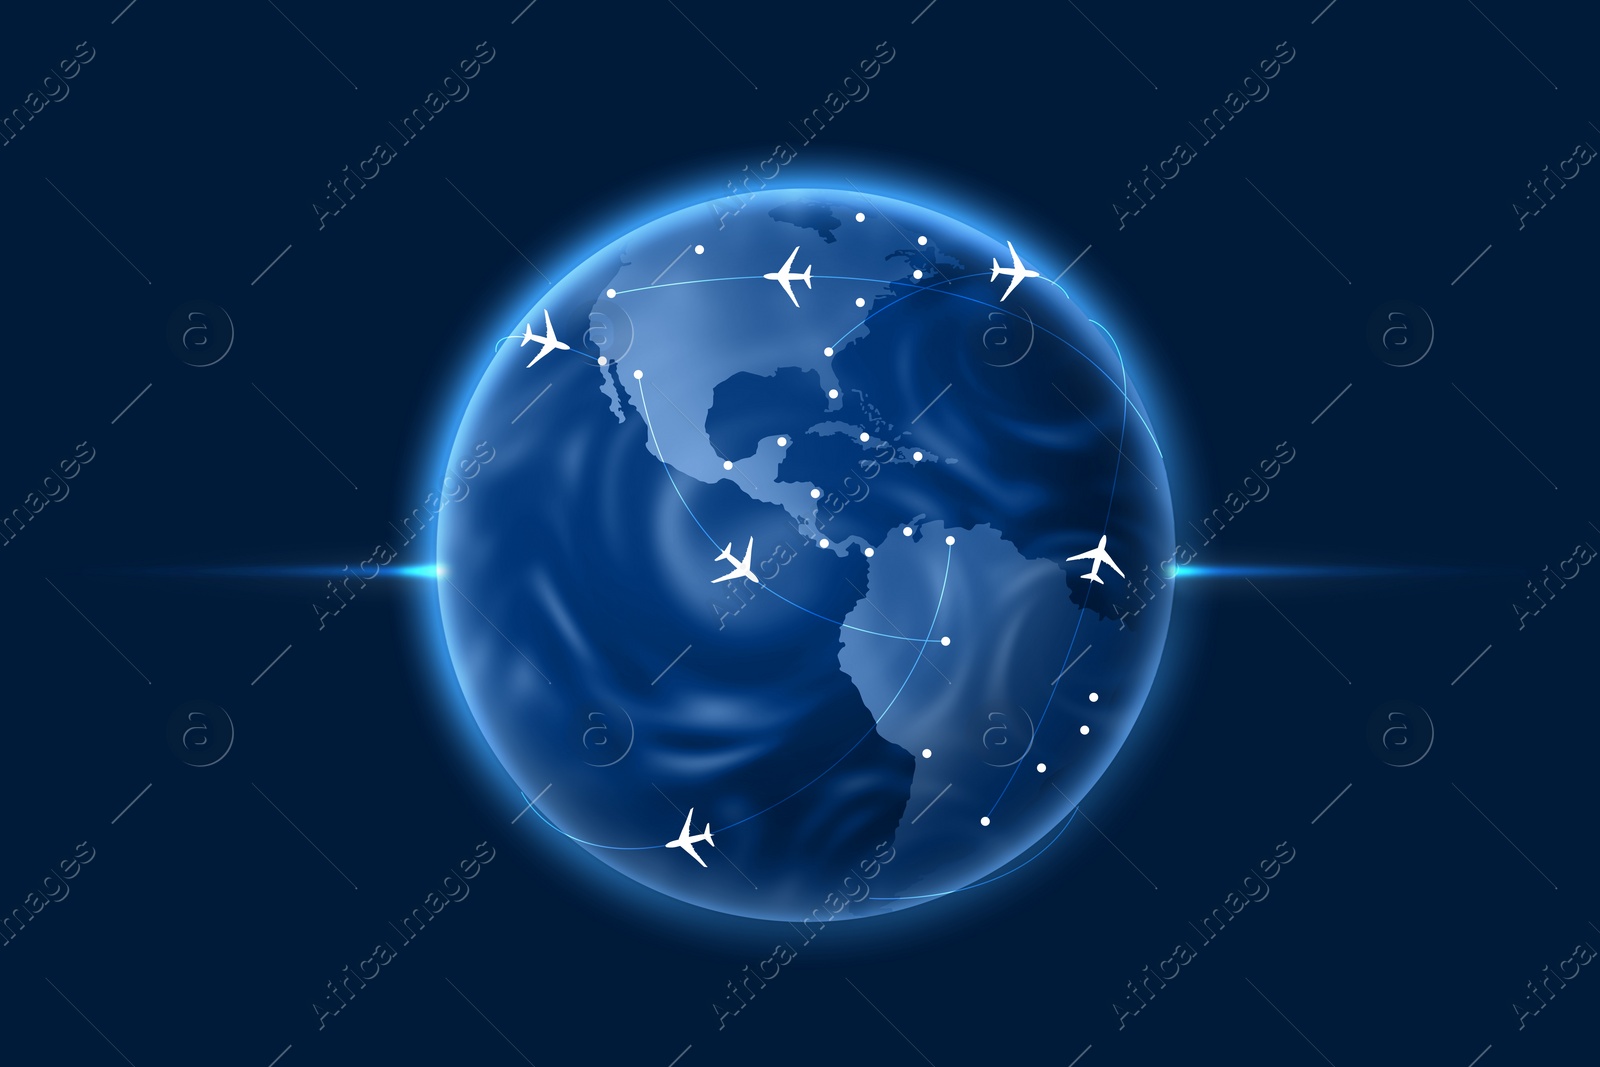 Illustration of World globe with flight routs, airplanes and destinations on blue background, illustration 